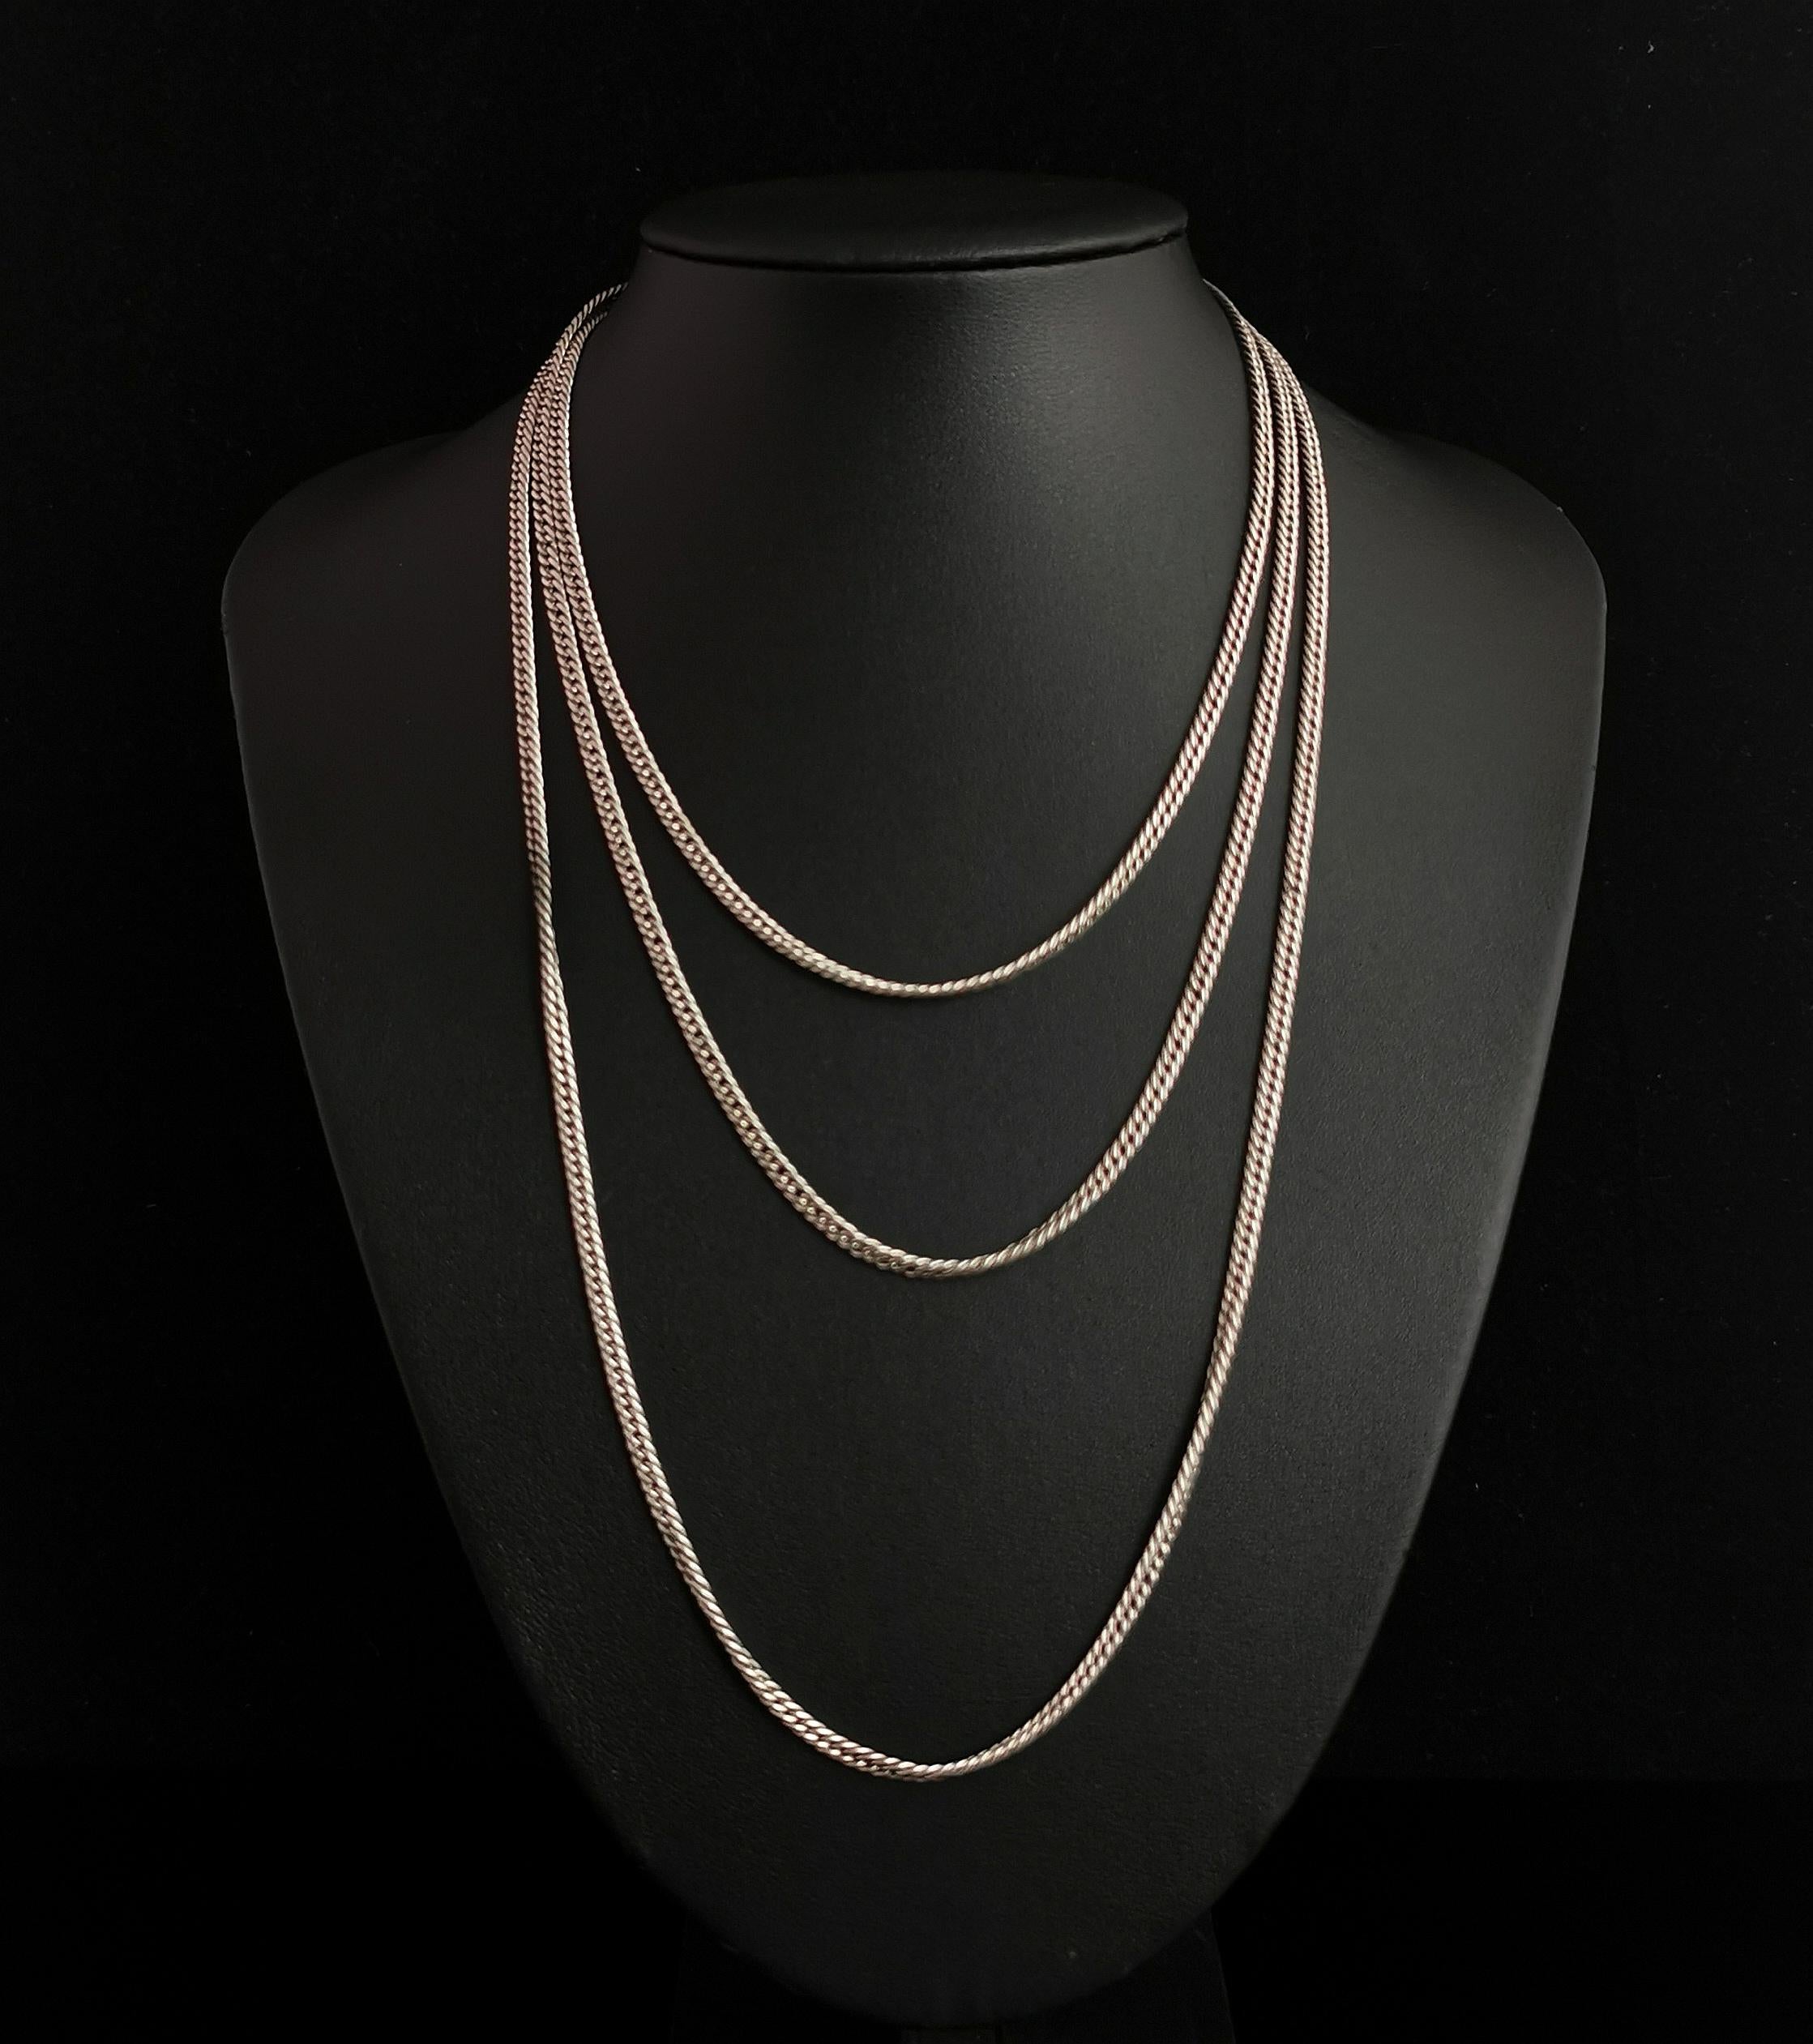 A gorgeous antique silver longuard chain or muff chain necklace.

This is a lovely long length chain at 58